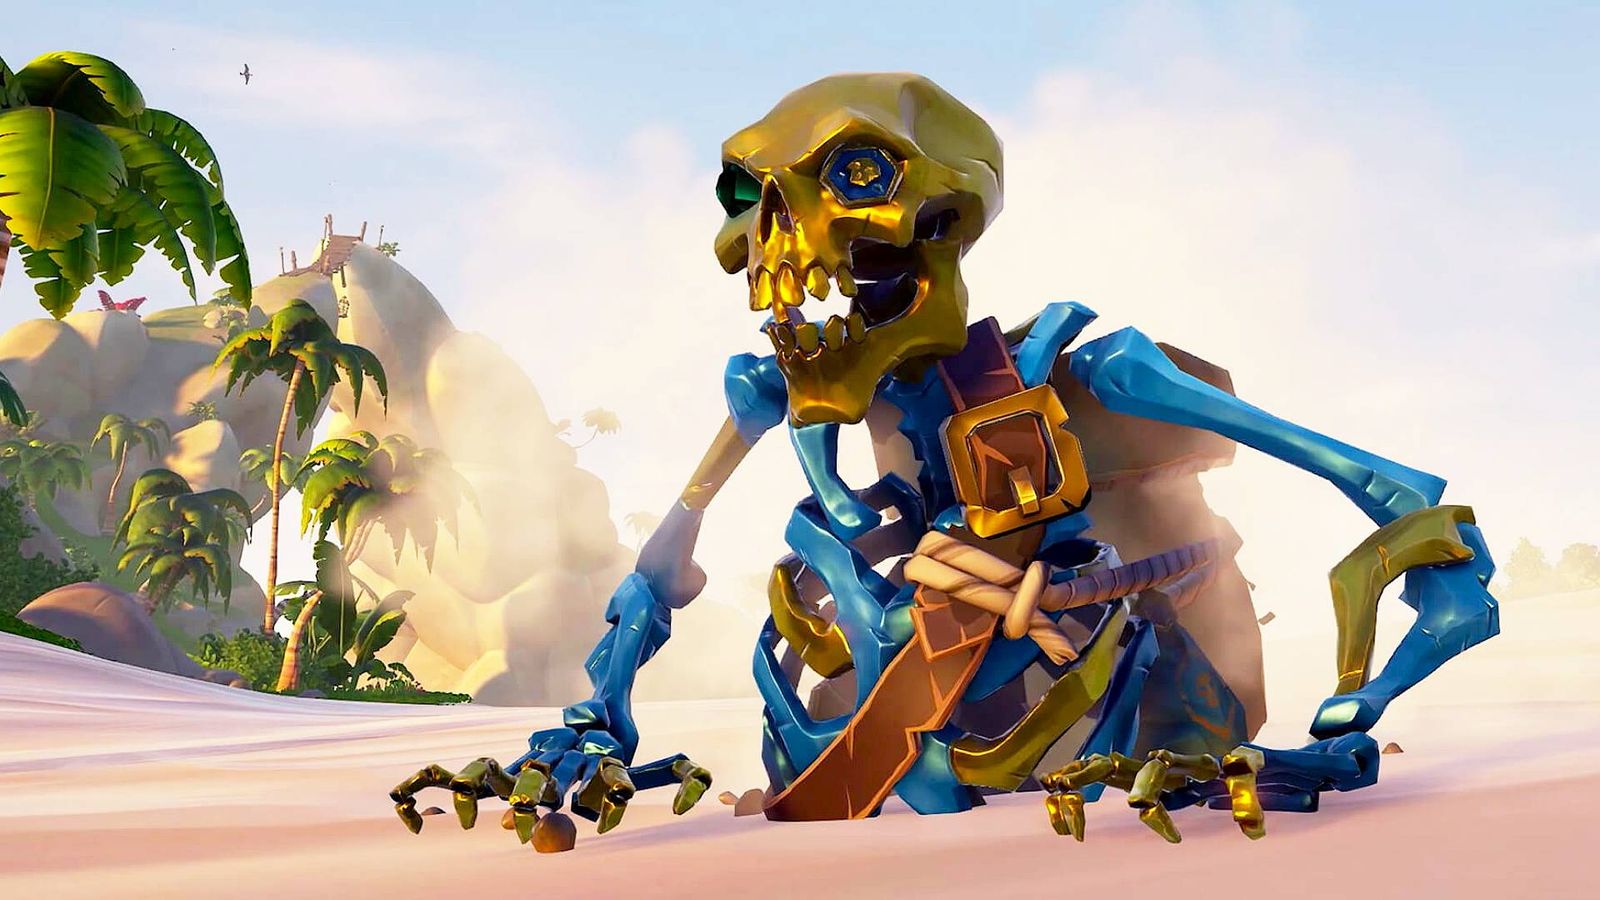 An Ancient Skeleton in Sea of Thieves